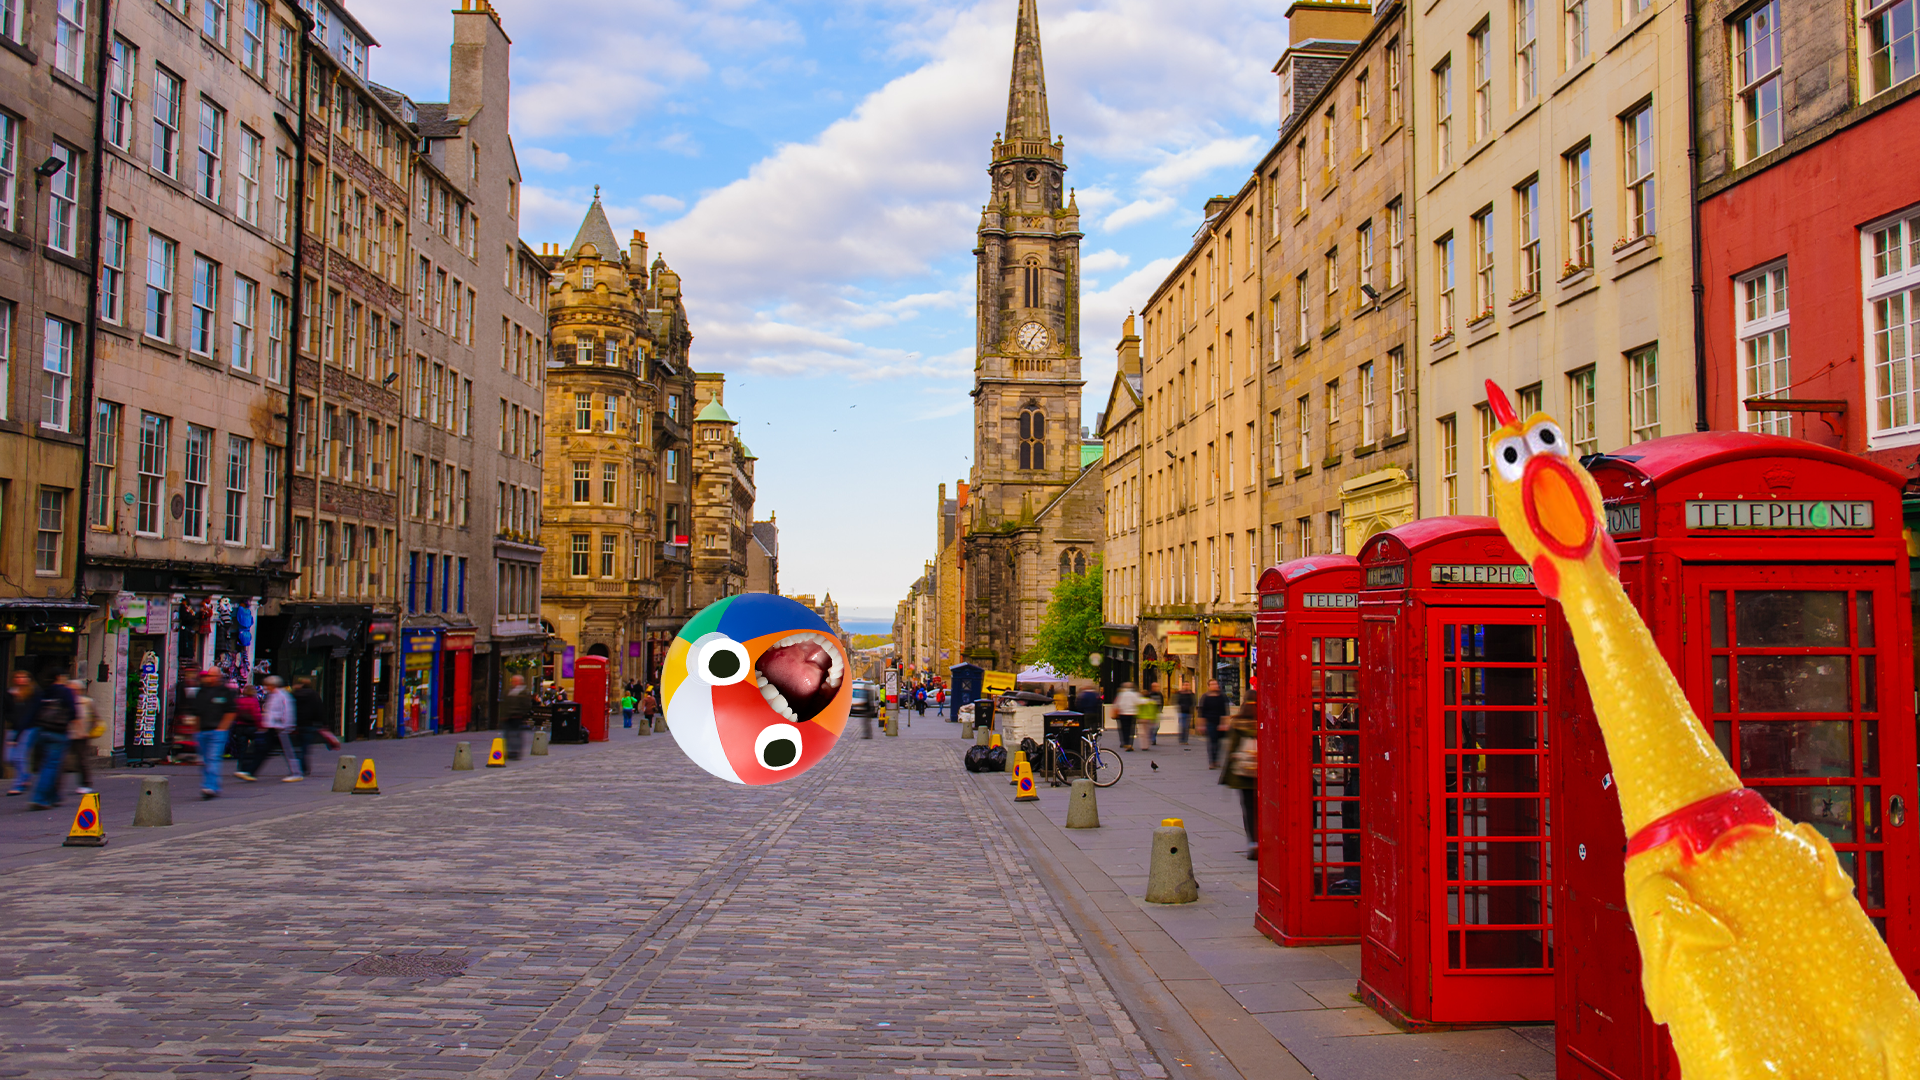 Royal Mile with Beano ball and rubber chicken